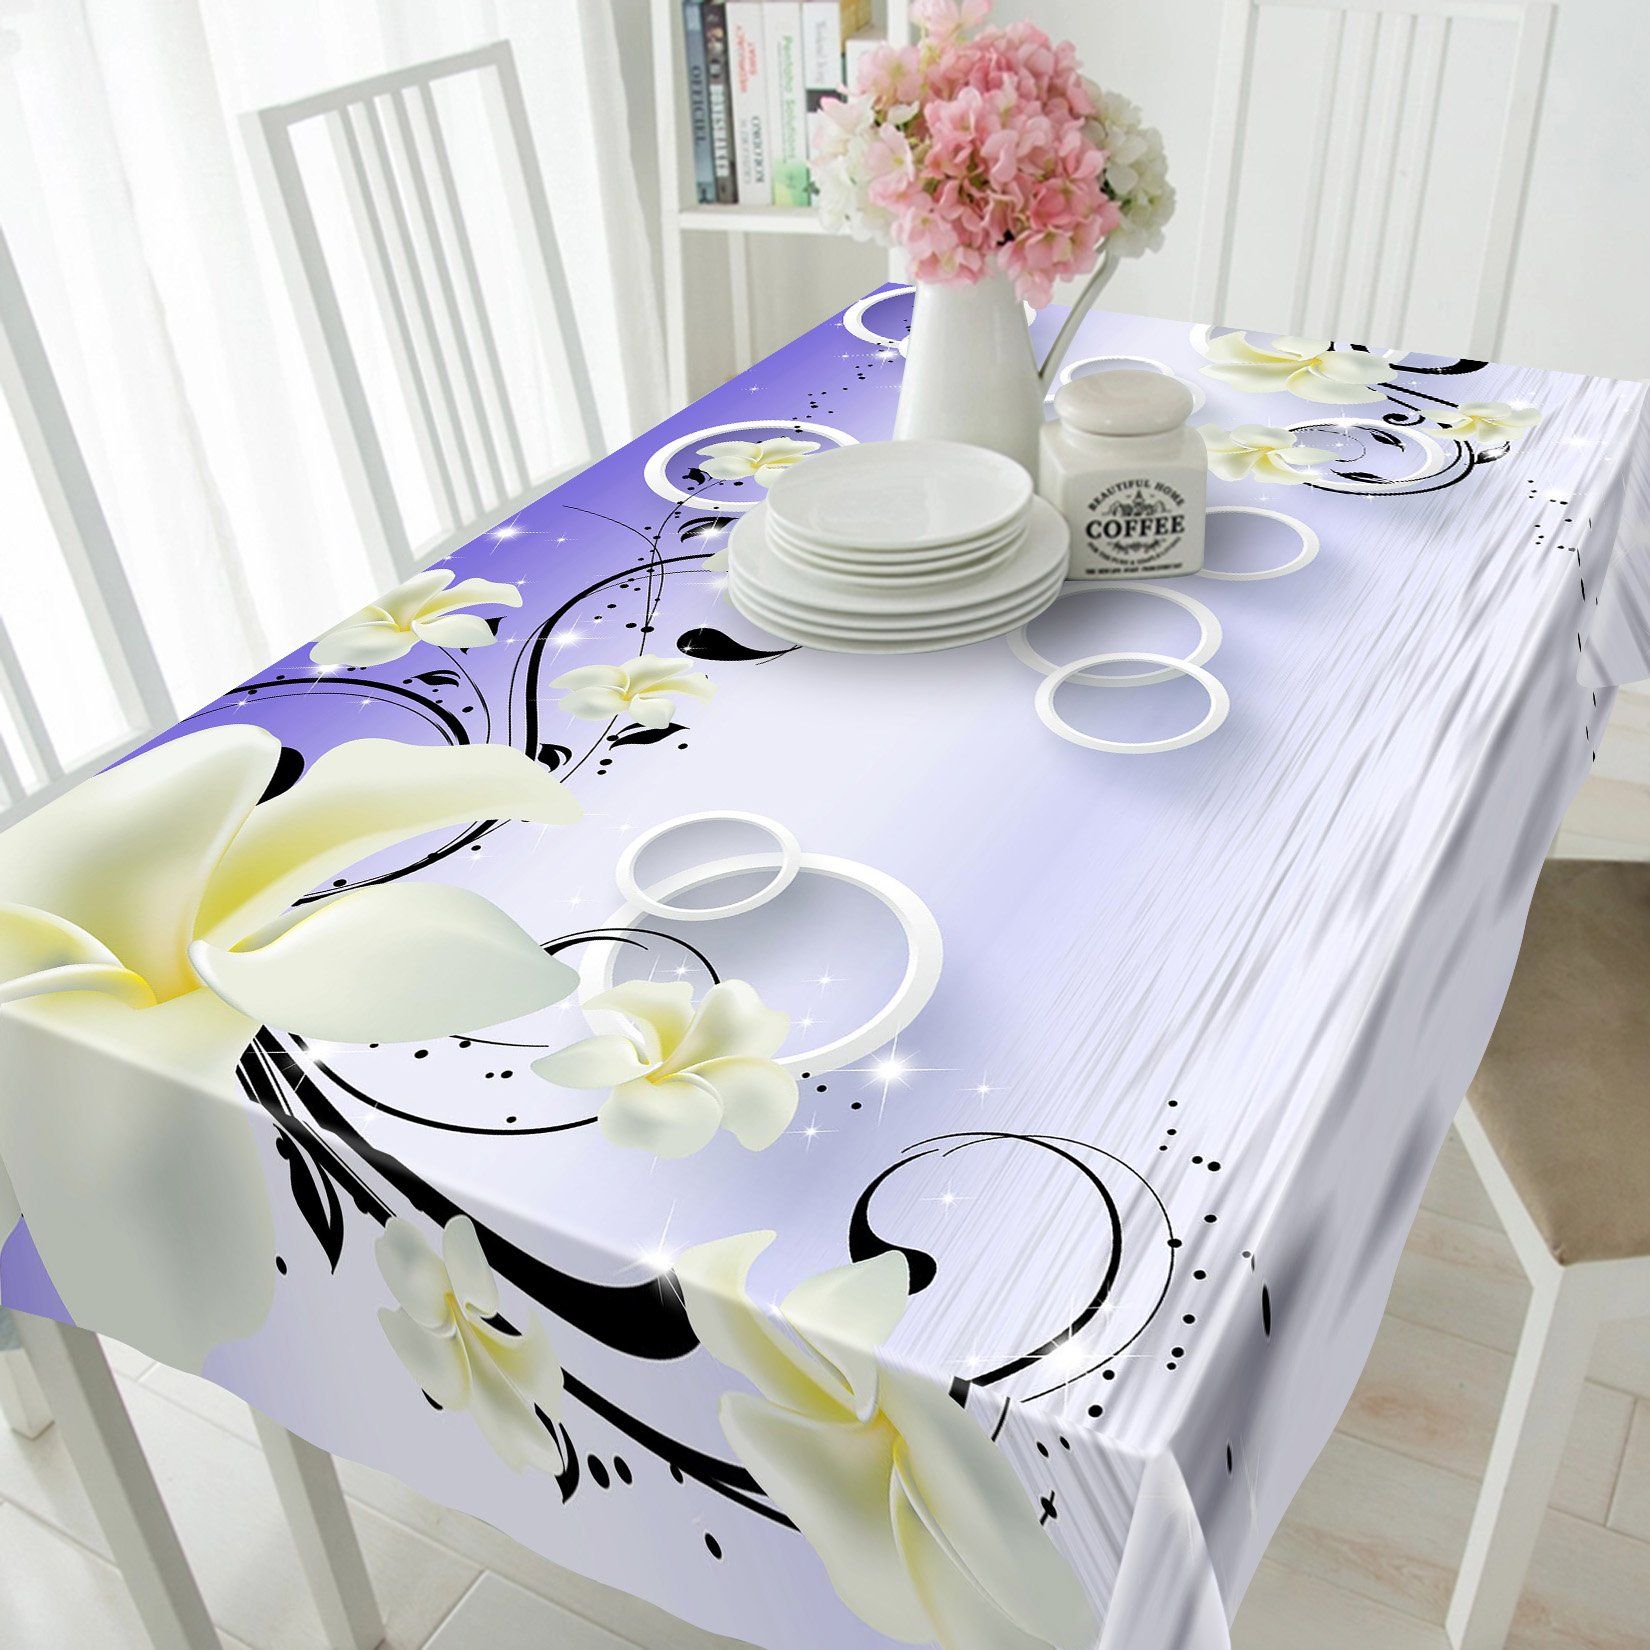 3D Rings And Flowers 157 Tablecloths Wallpaper AJ Wallpaper 